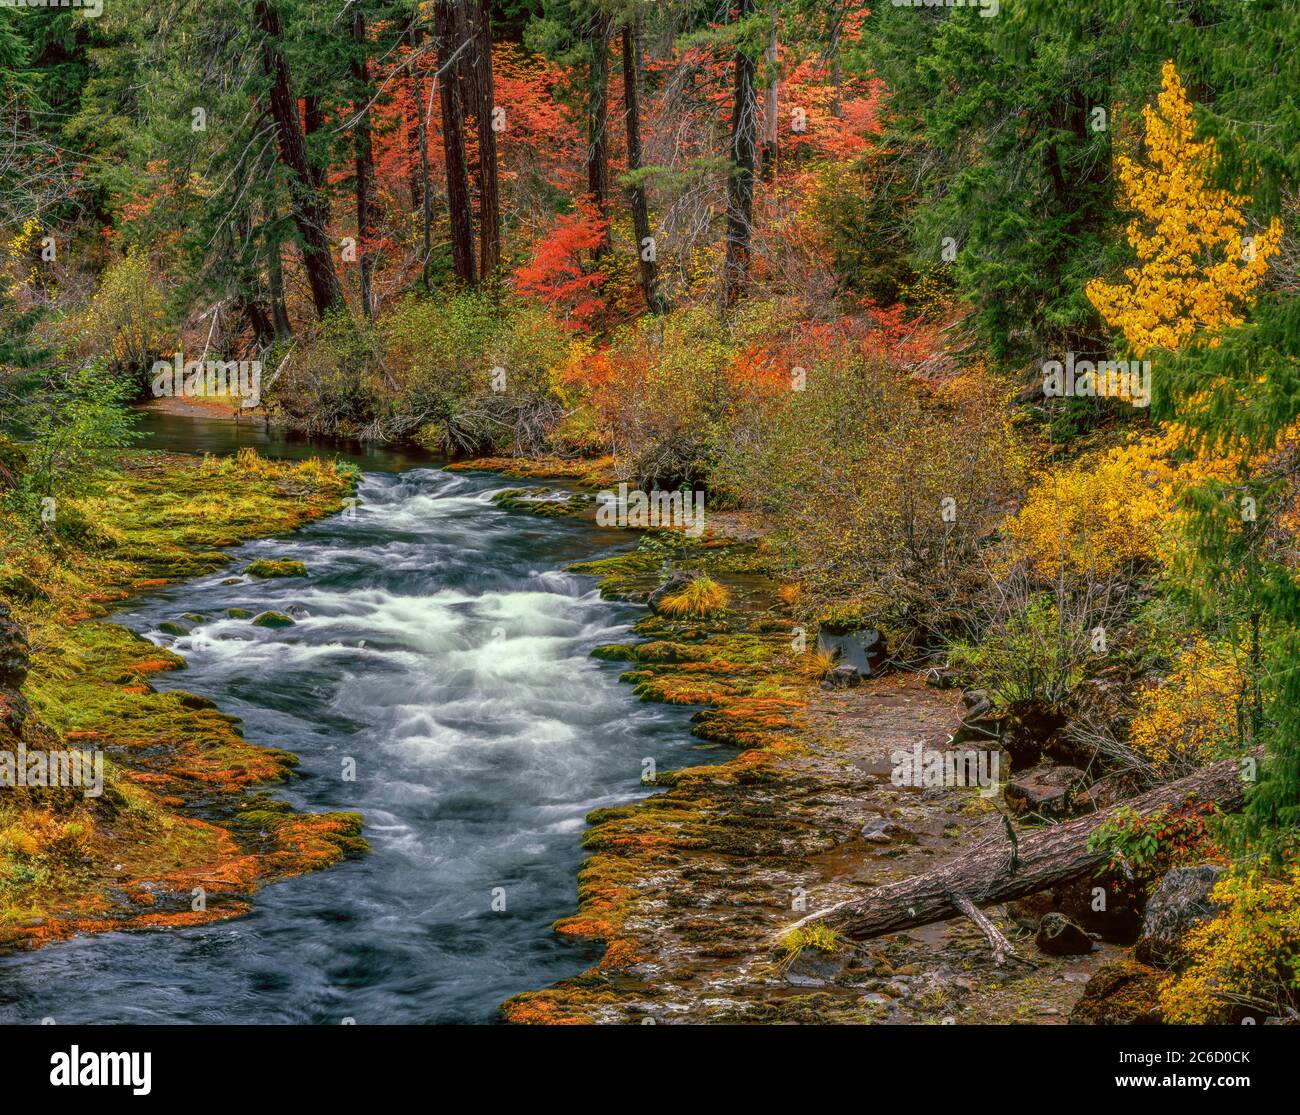 Takelma Gorge, Rogue River, Rogue River National Wild and Scenic River, Oregon, Rogue River National Forest, Oregon Stock Photo